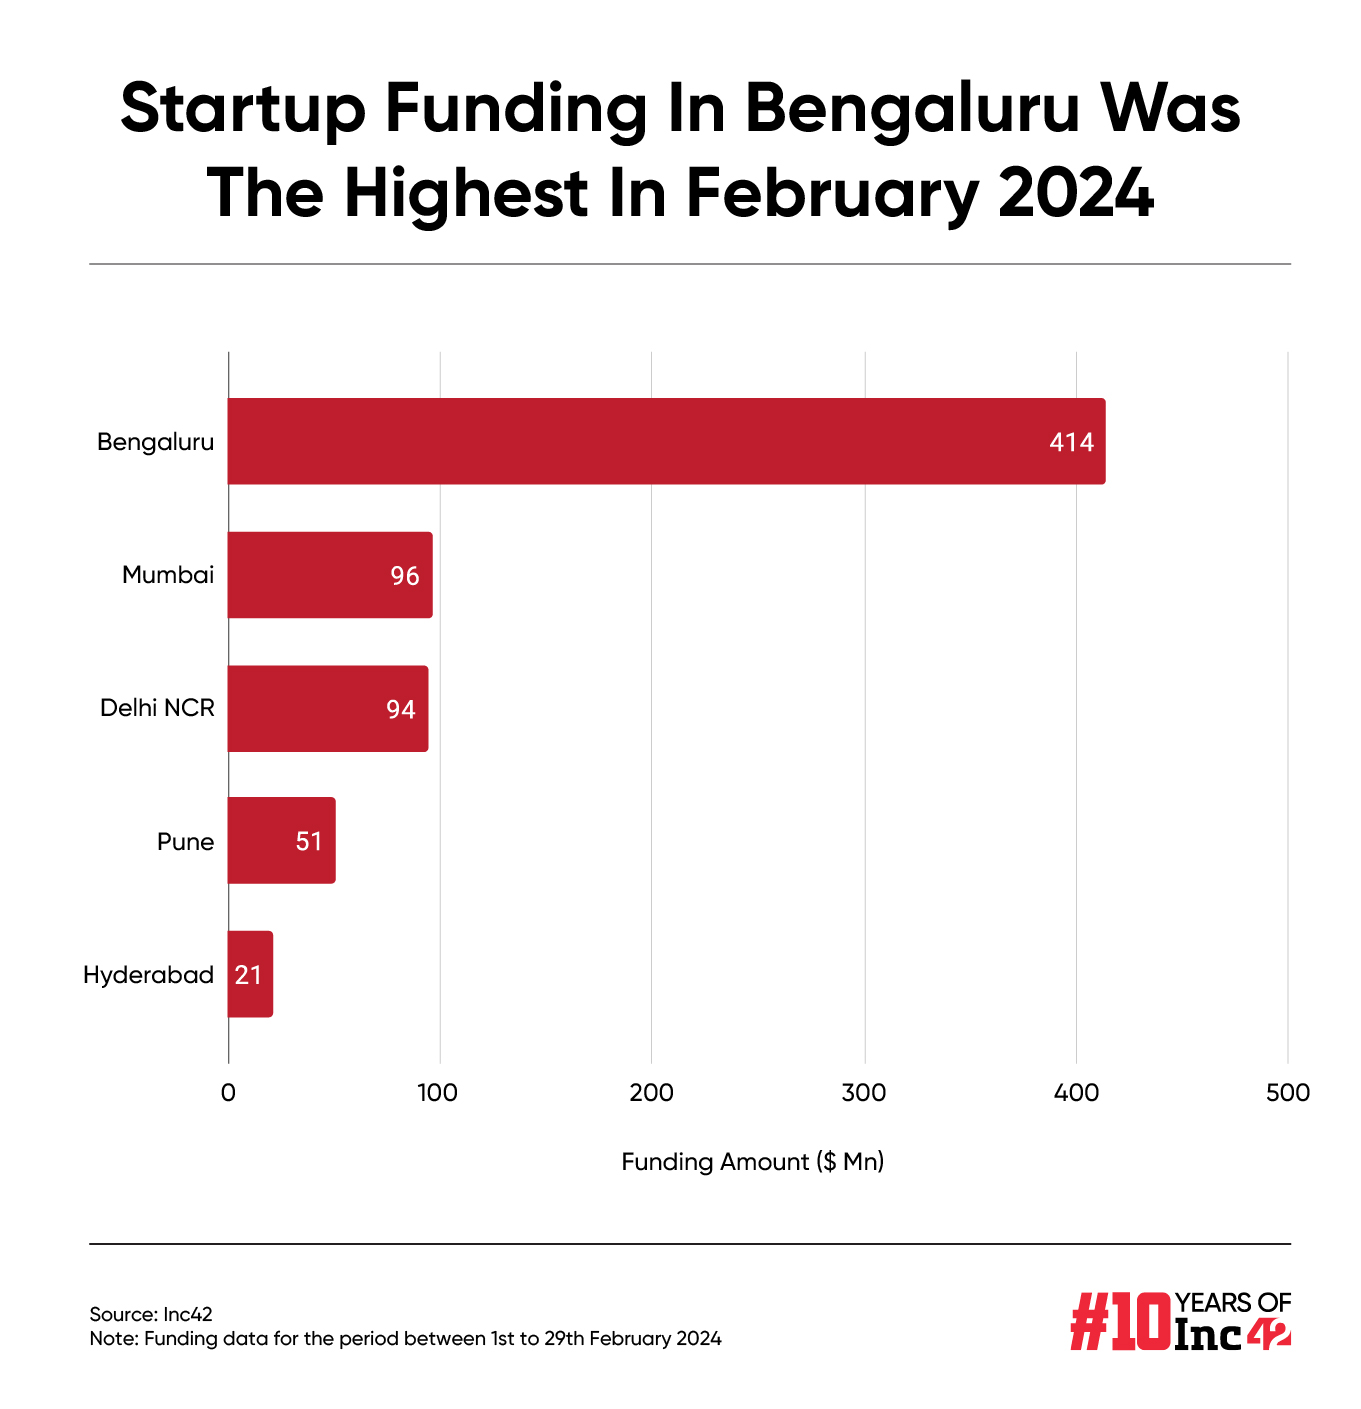 After January Blues, Indian Startup Funding Zooms 43% MoM In February 2024 